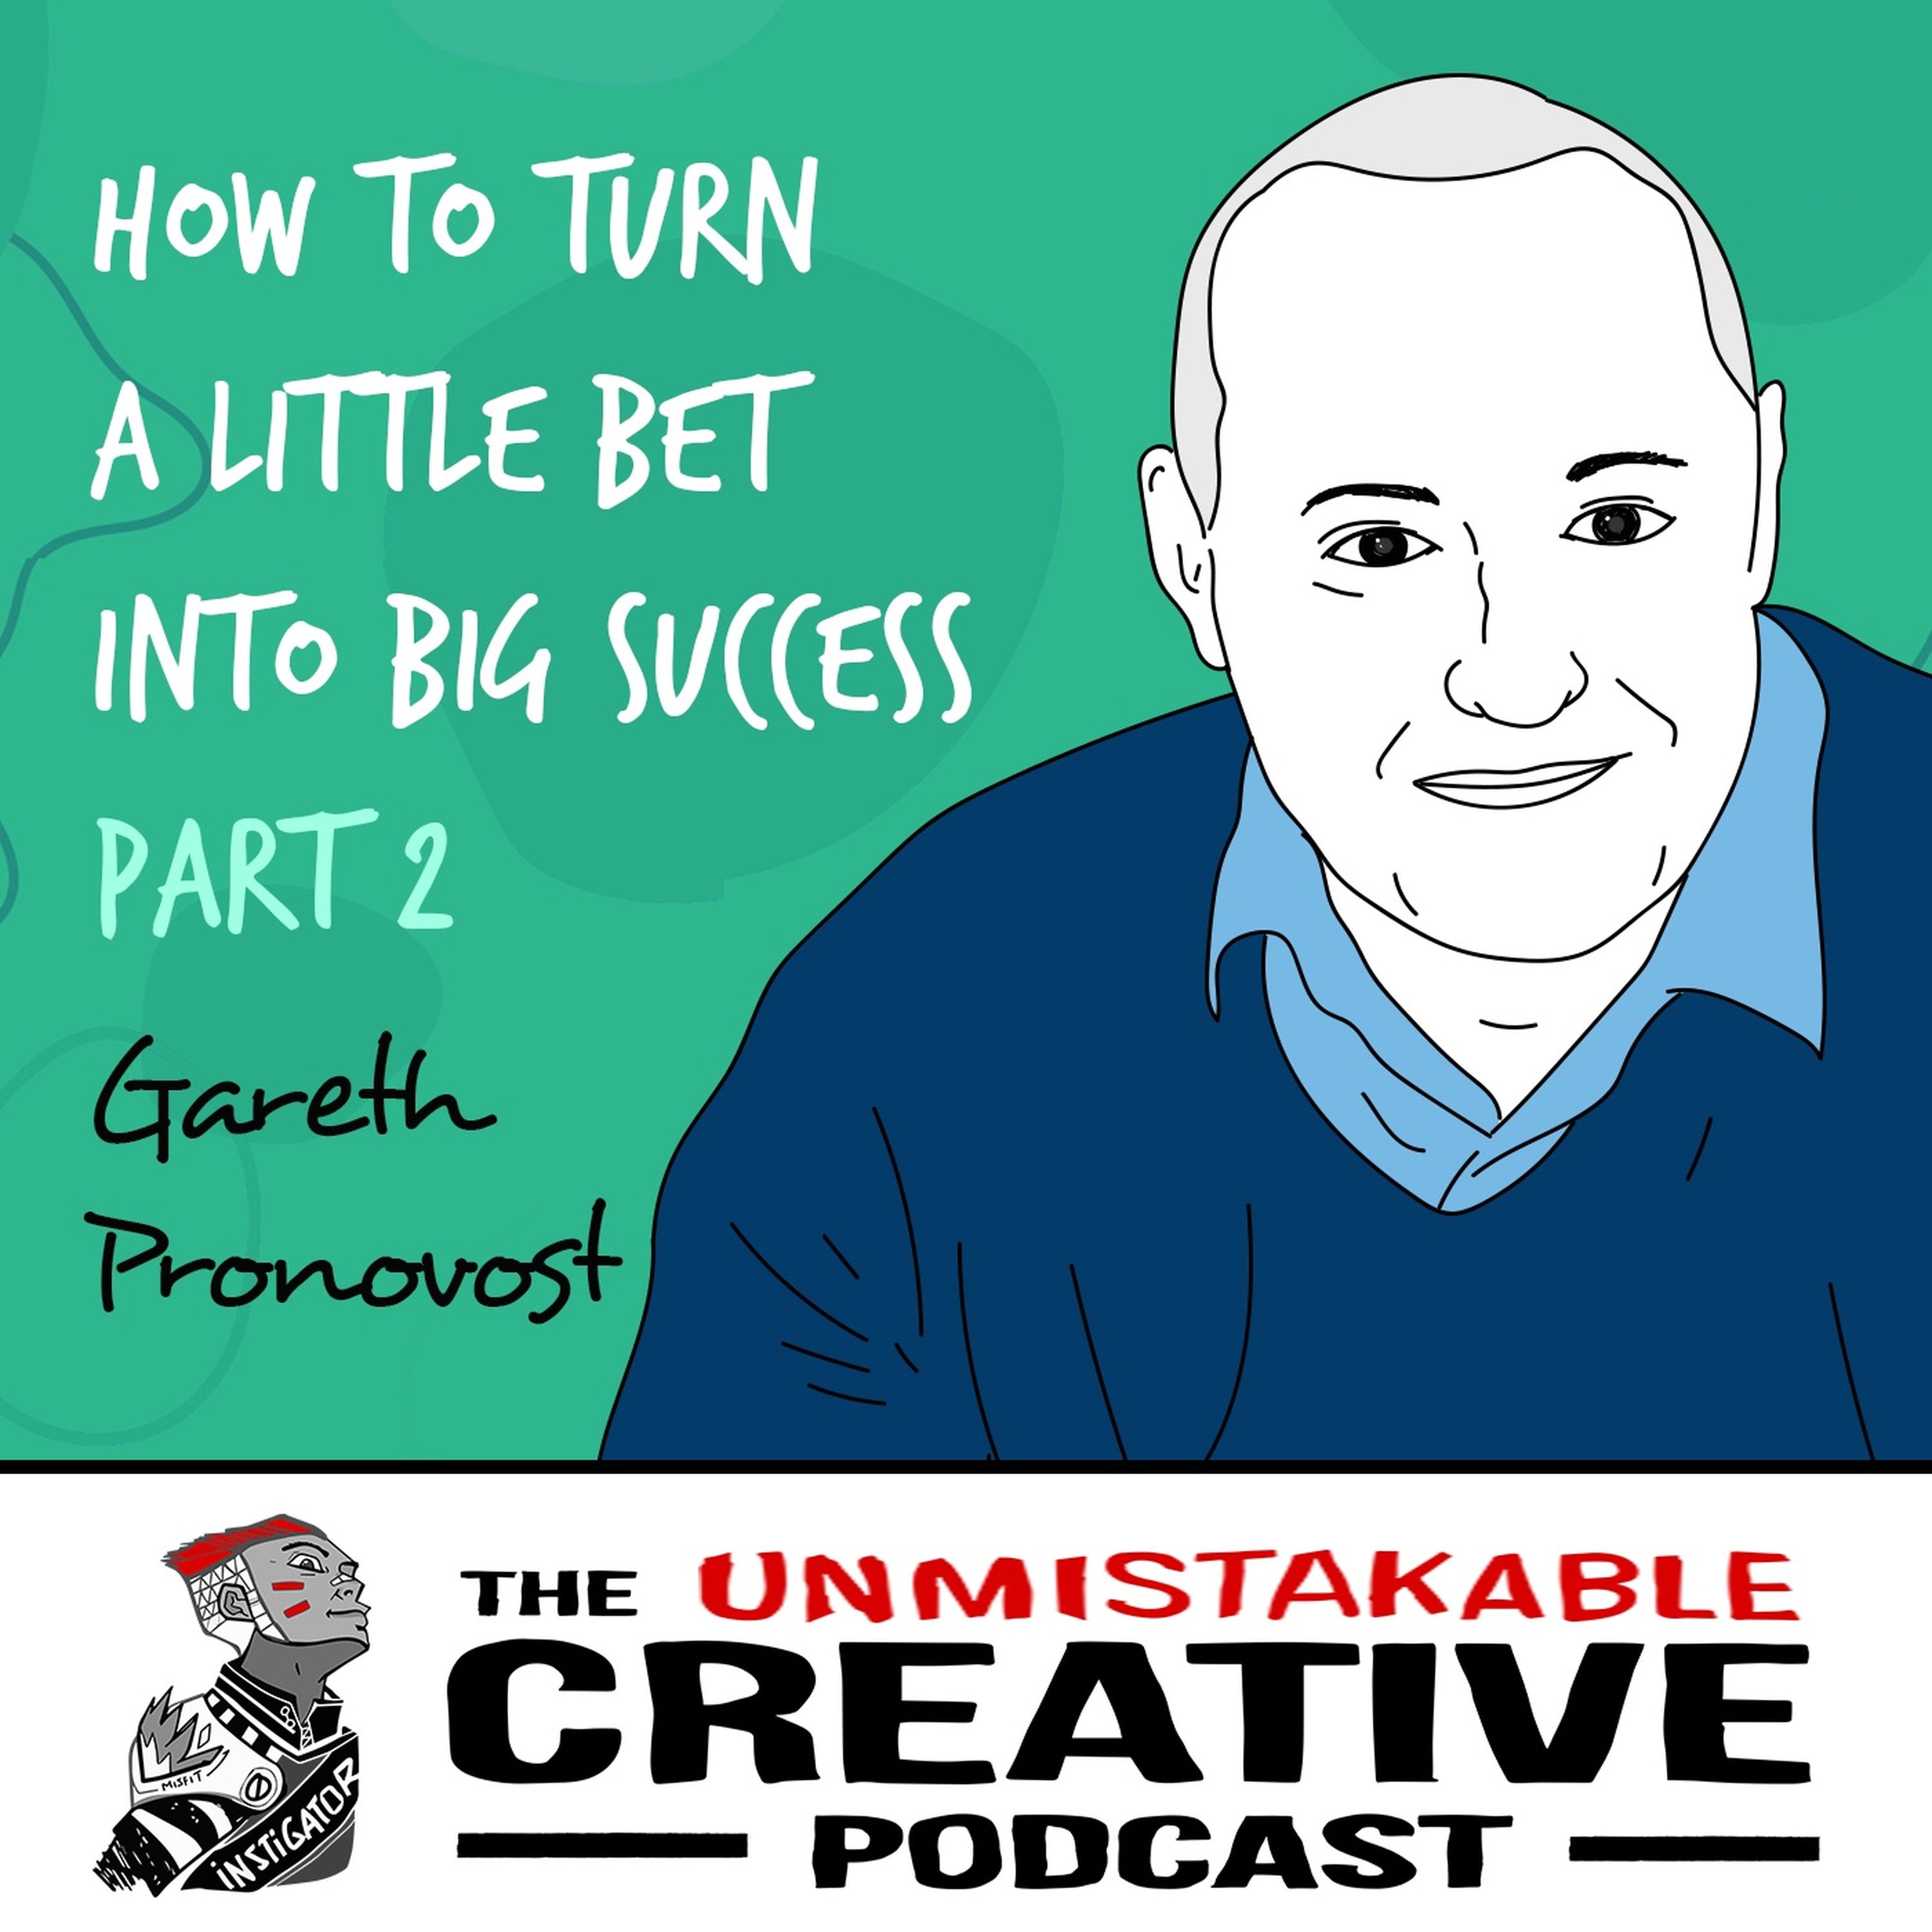 Gareth Pronovost | How to Turn a Little Bet into Big Success - Part 2 Image